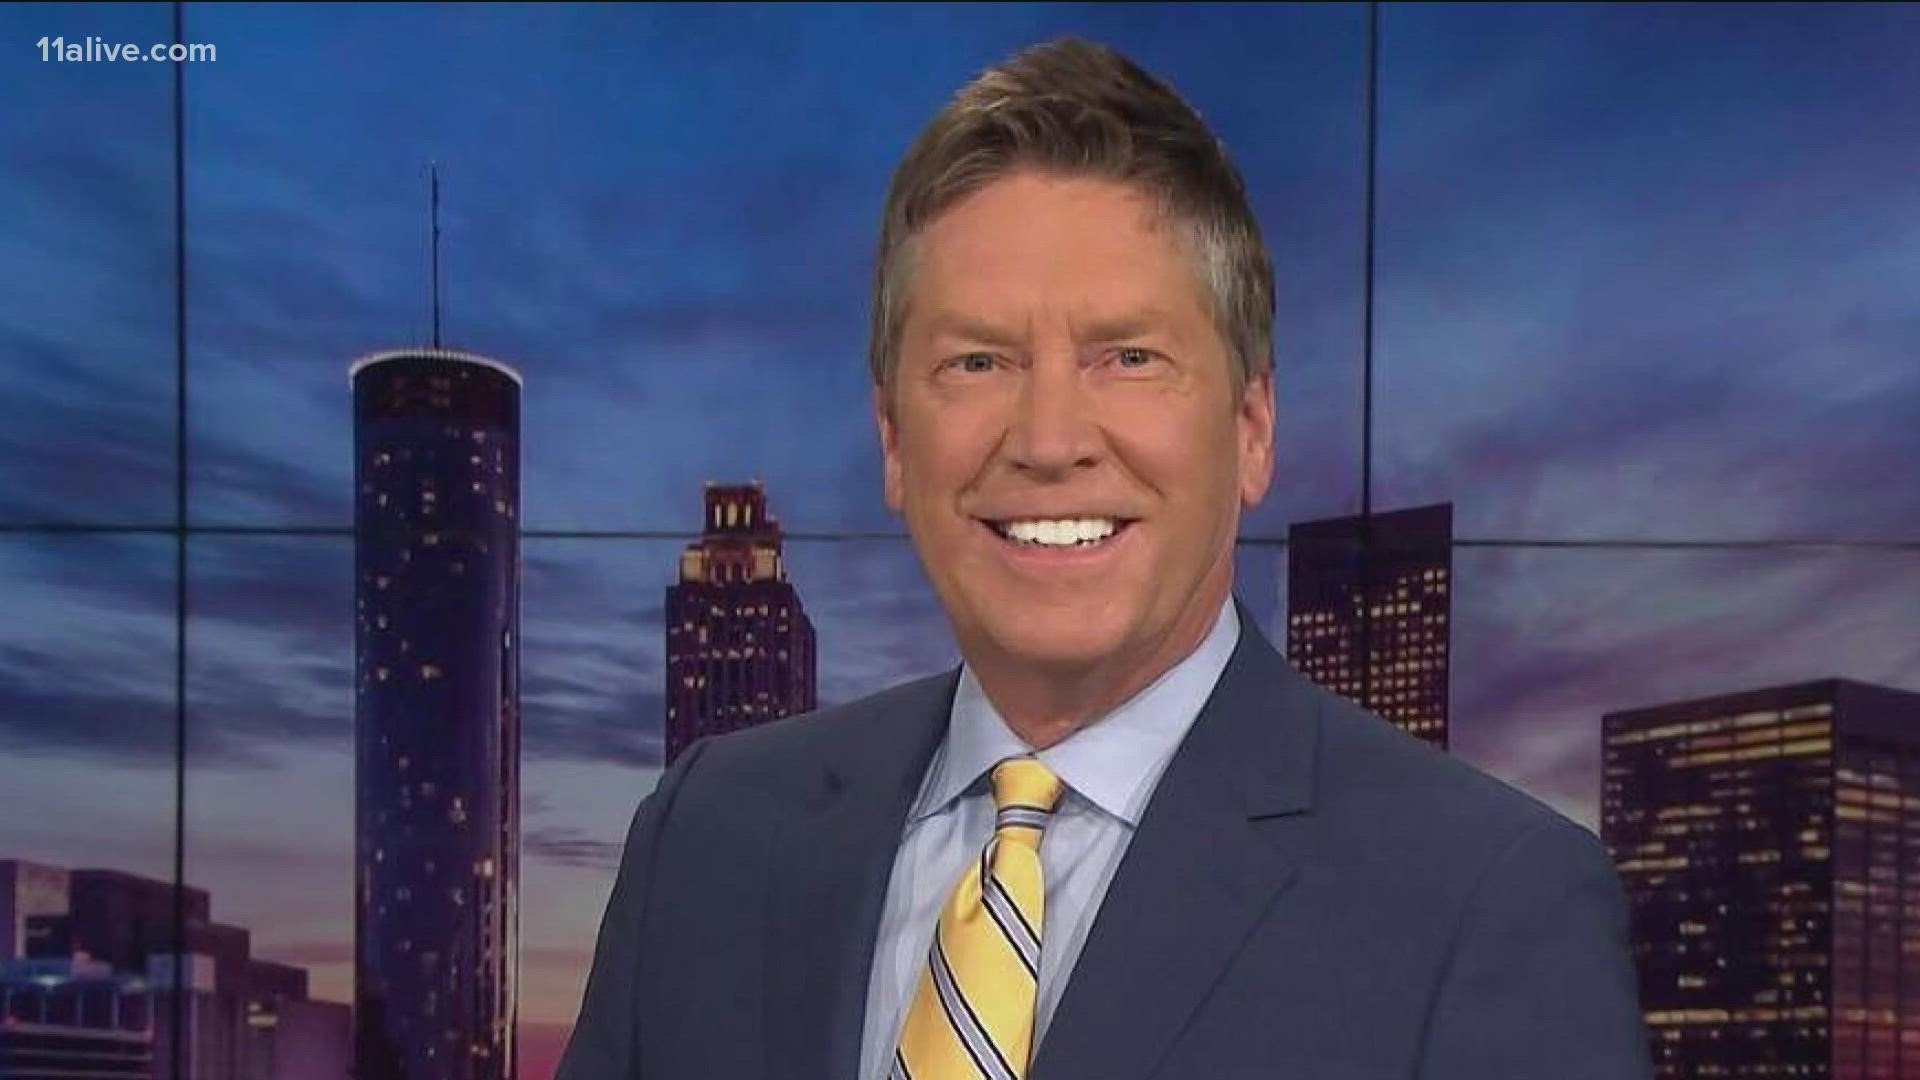 11Alive's Chief Meteorologist Chris Holcomb is being honored by the Southeast Chapter of the National Academy of Television Arts and Sciences.